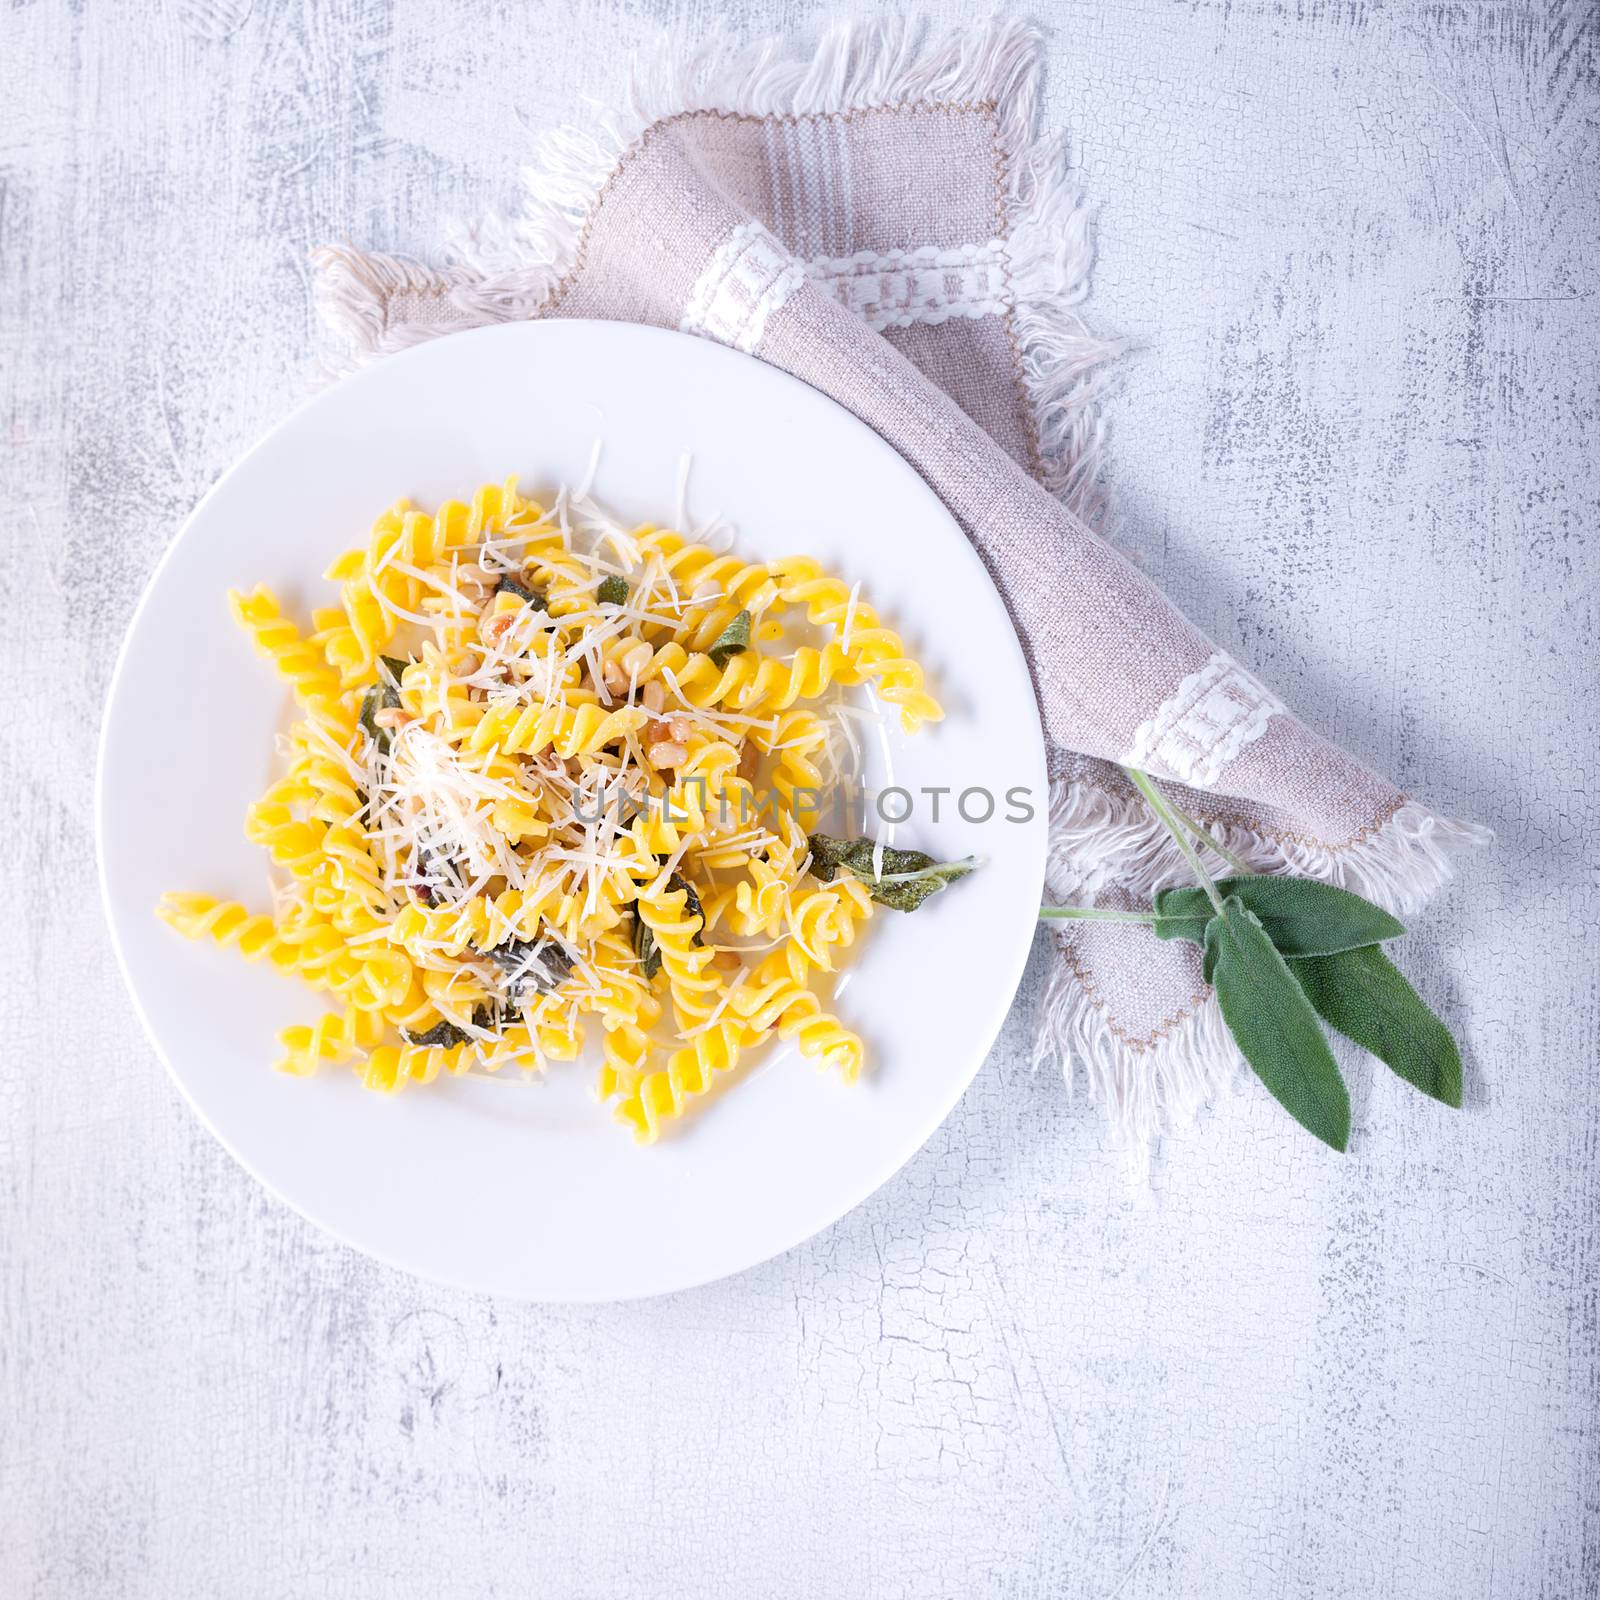 Pasta with garlic and sage by supercat67